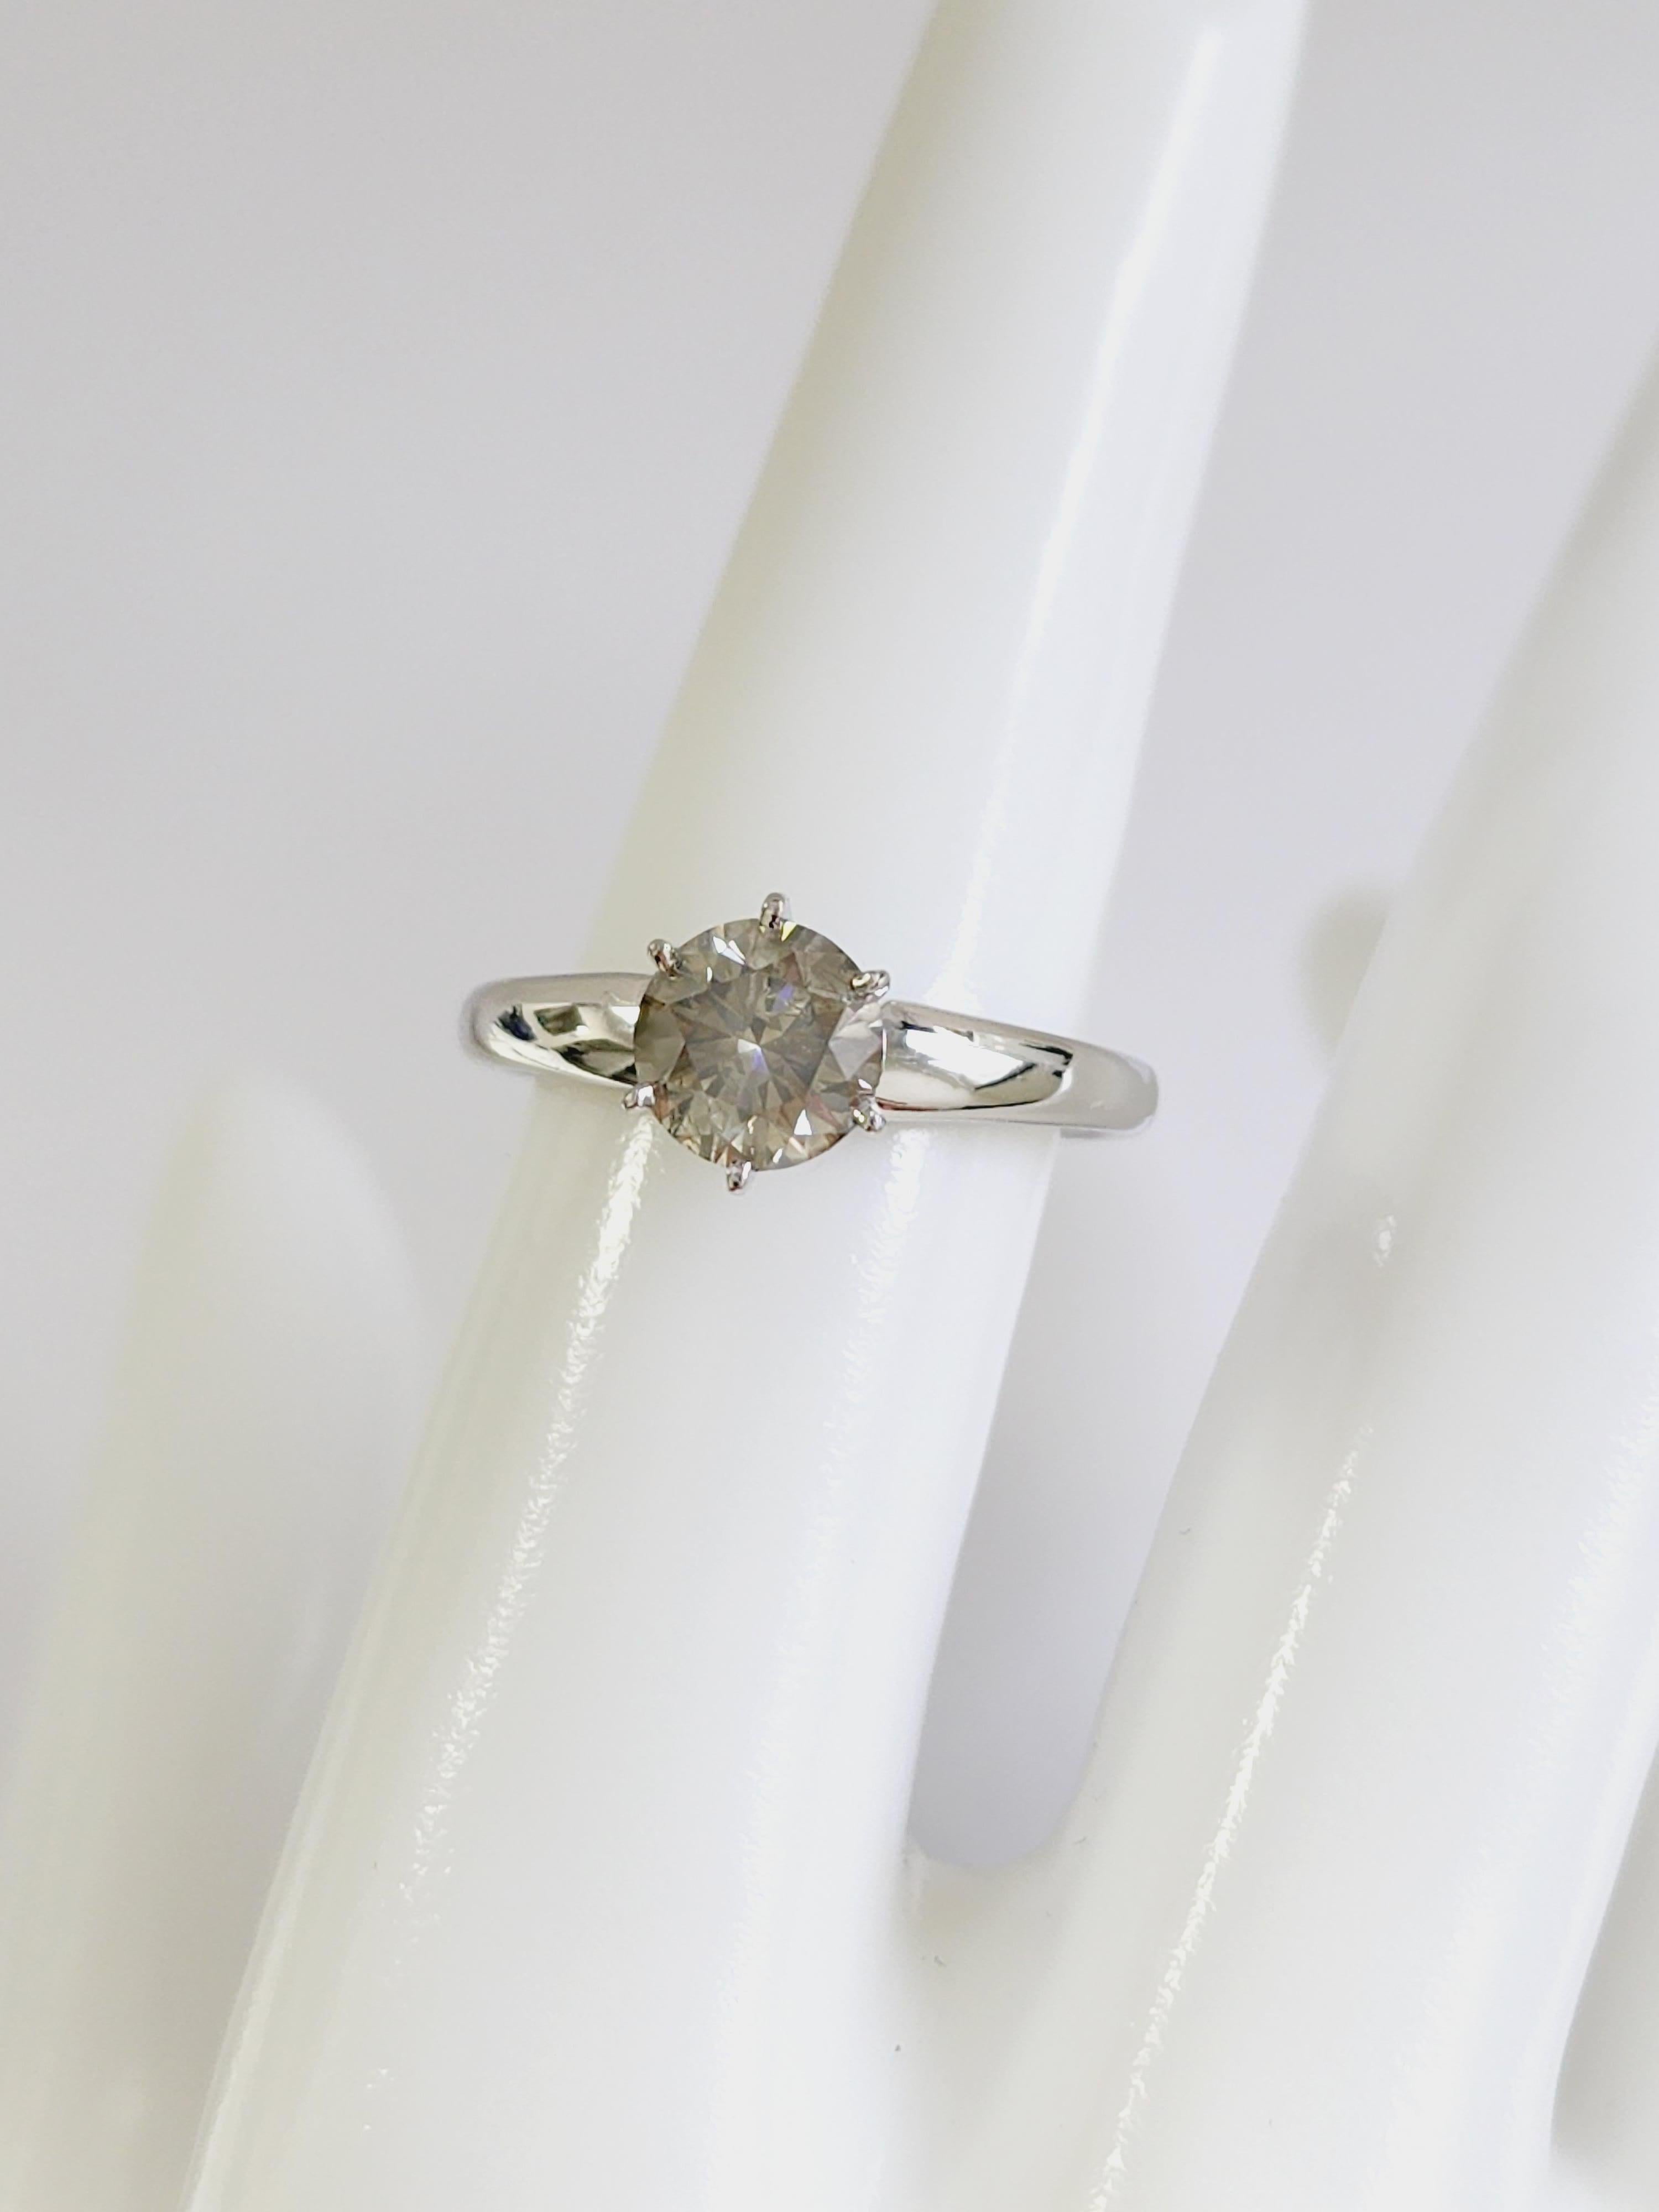 1.29 Carat Round Cut Color Diamond White Gold Solitaire Ring 14 Karat In New Condition For Sale In Great Neck, NY